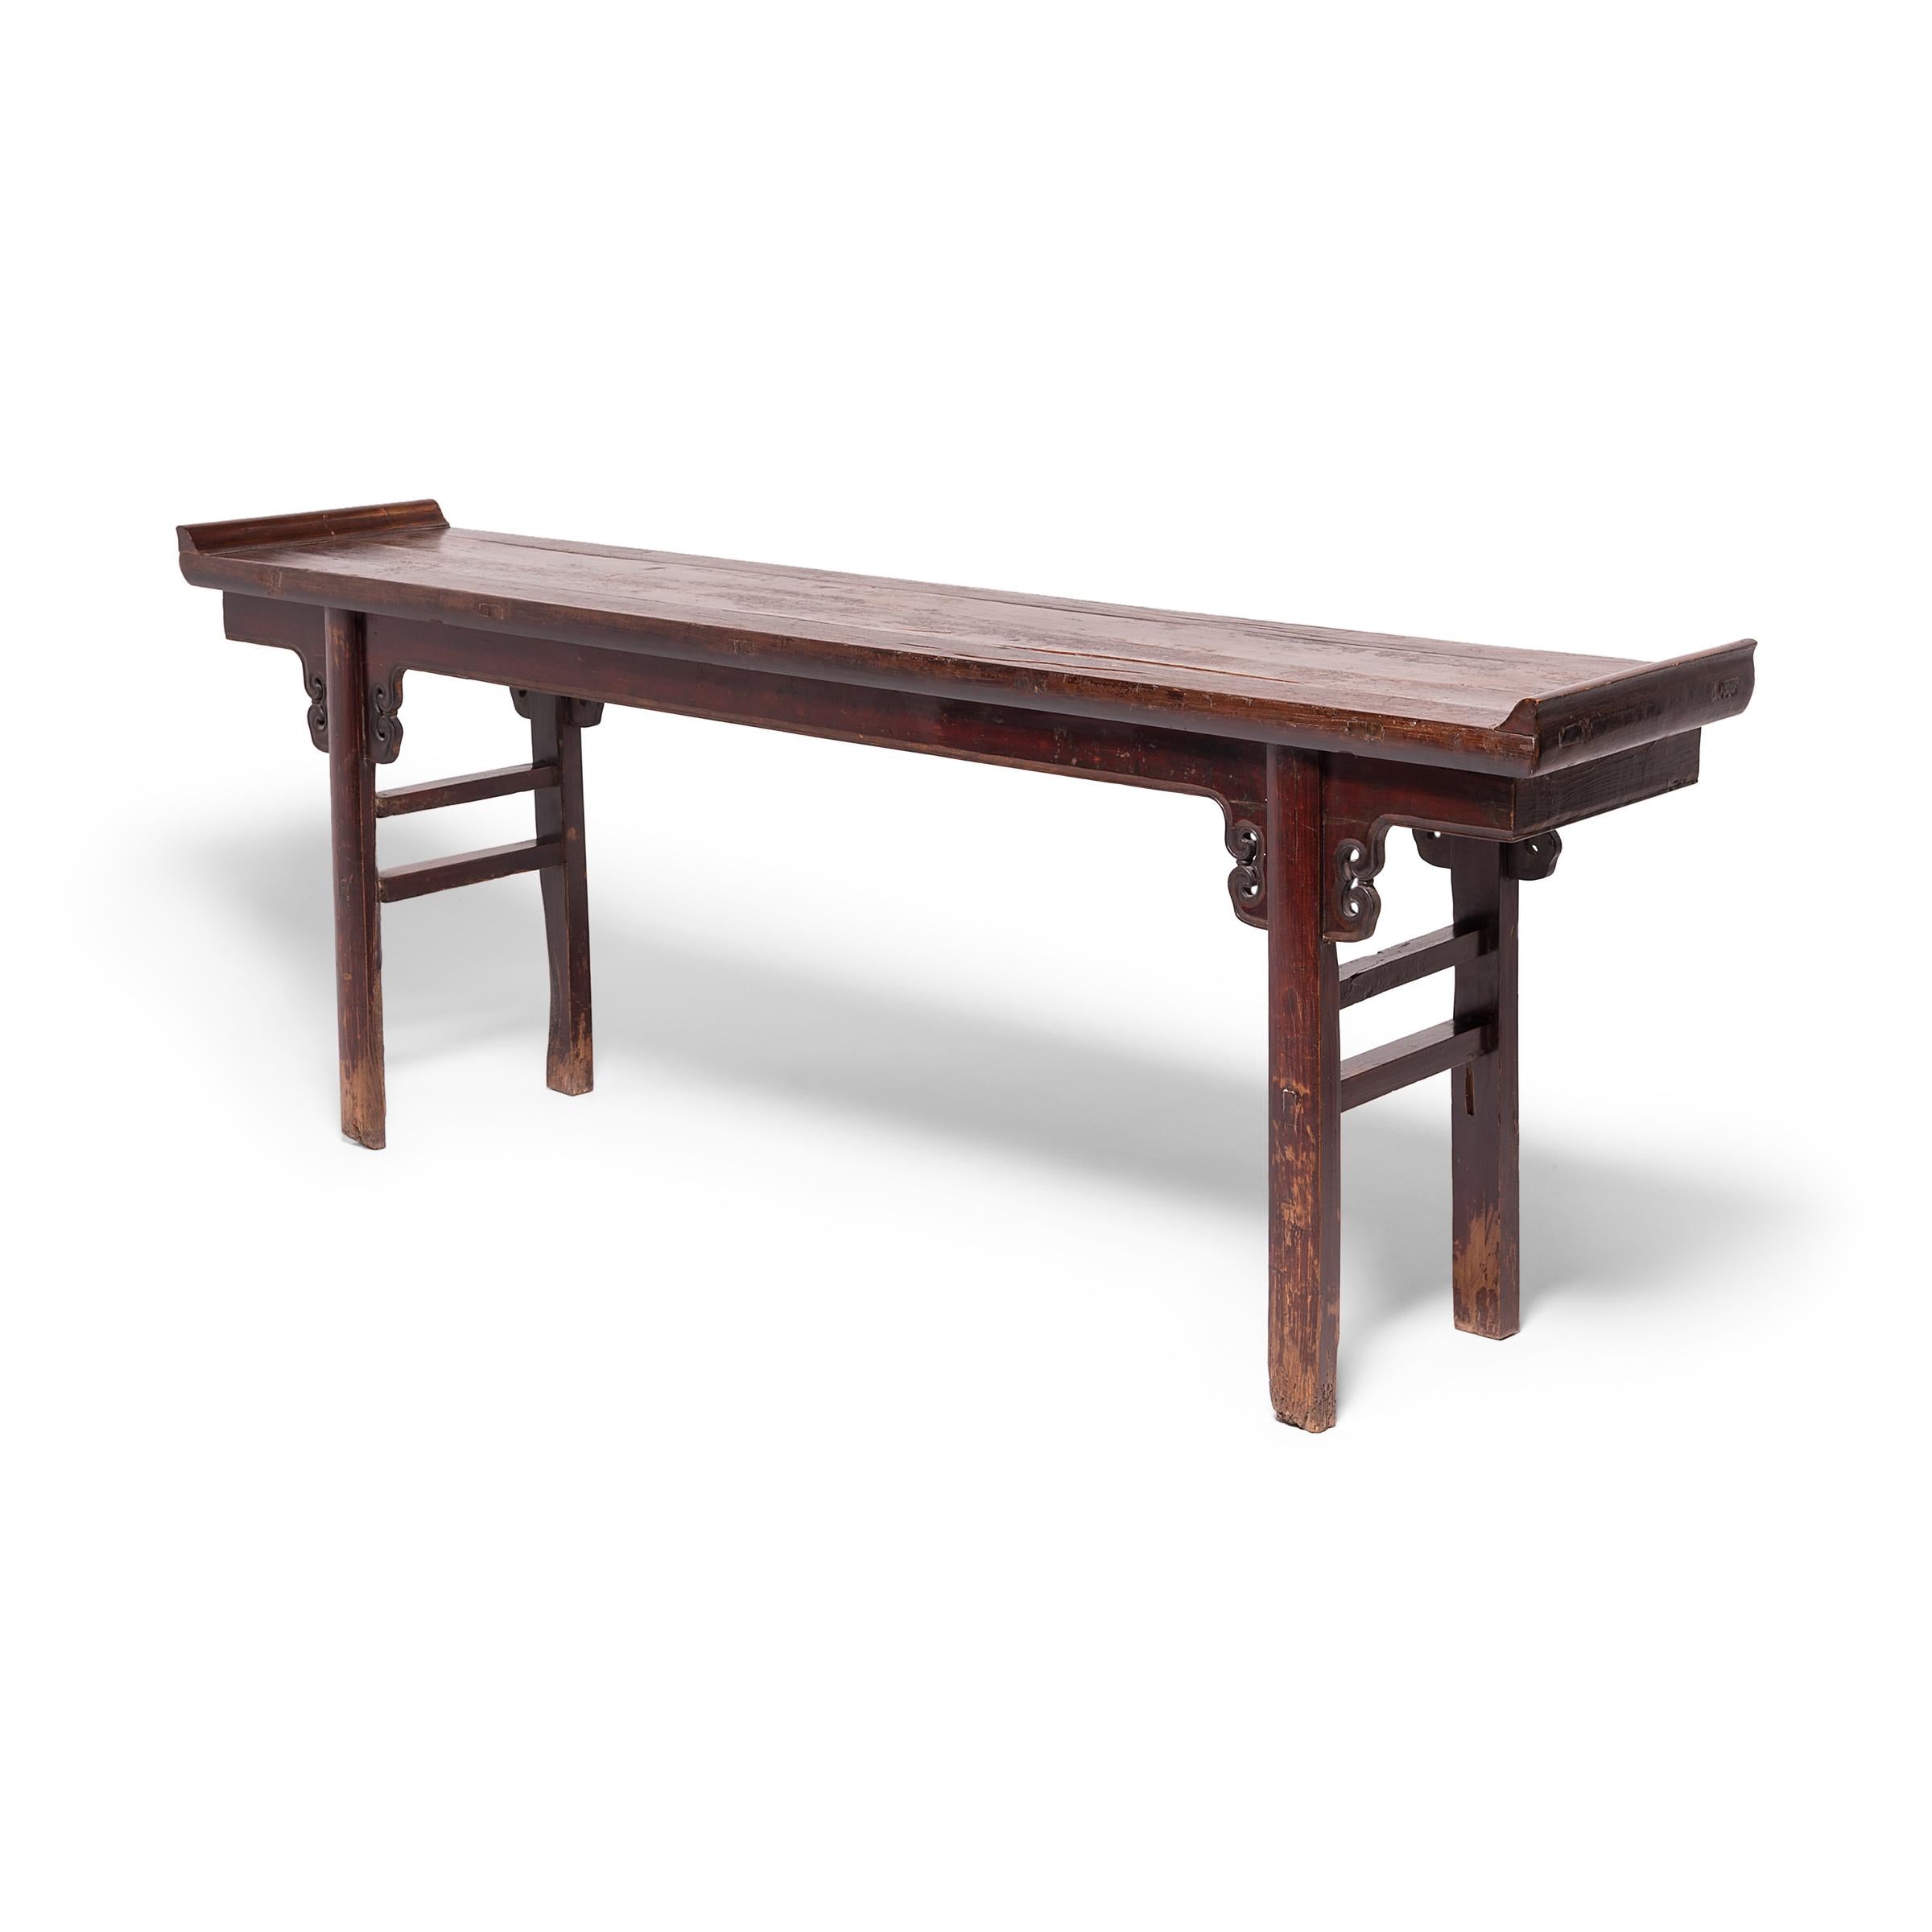 Although this beautiful 19th century altar table was crafted in the late Qing-dynasty, its refined form hearkens back to earlier Ming-dynasty designs. The altar's wide tabletop surface is adorned with everted flanges and supported by rounded legs,